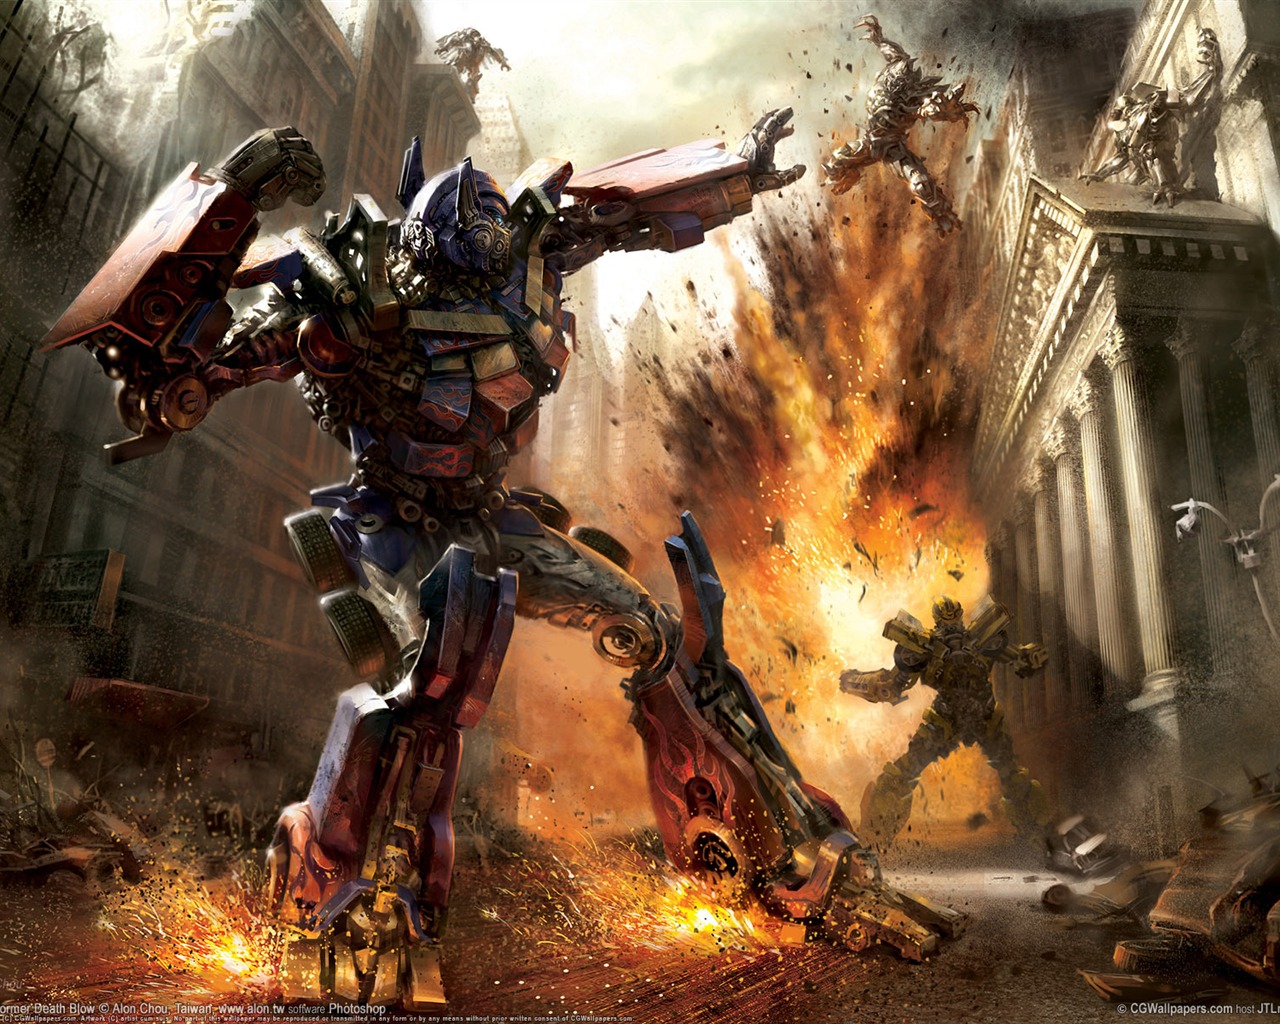 Transformers: The Dark Of The Moon HD wallpapers #8 - 1280x1024